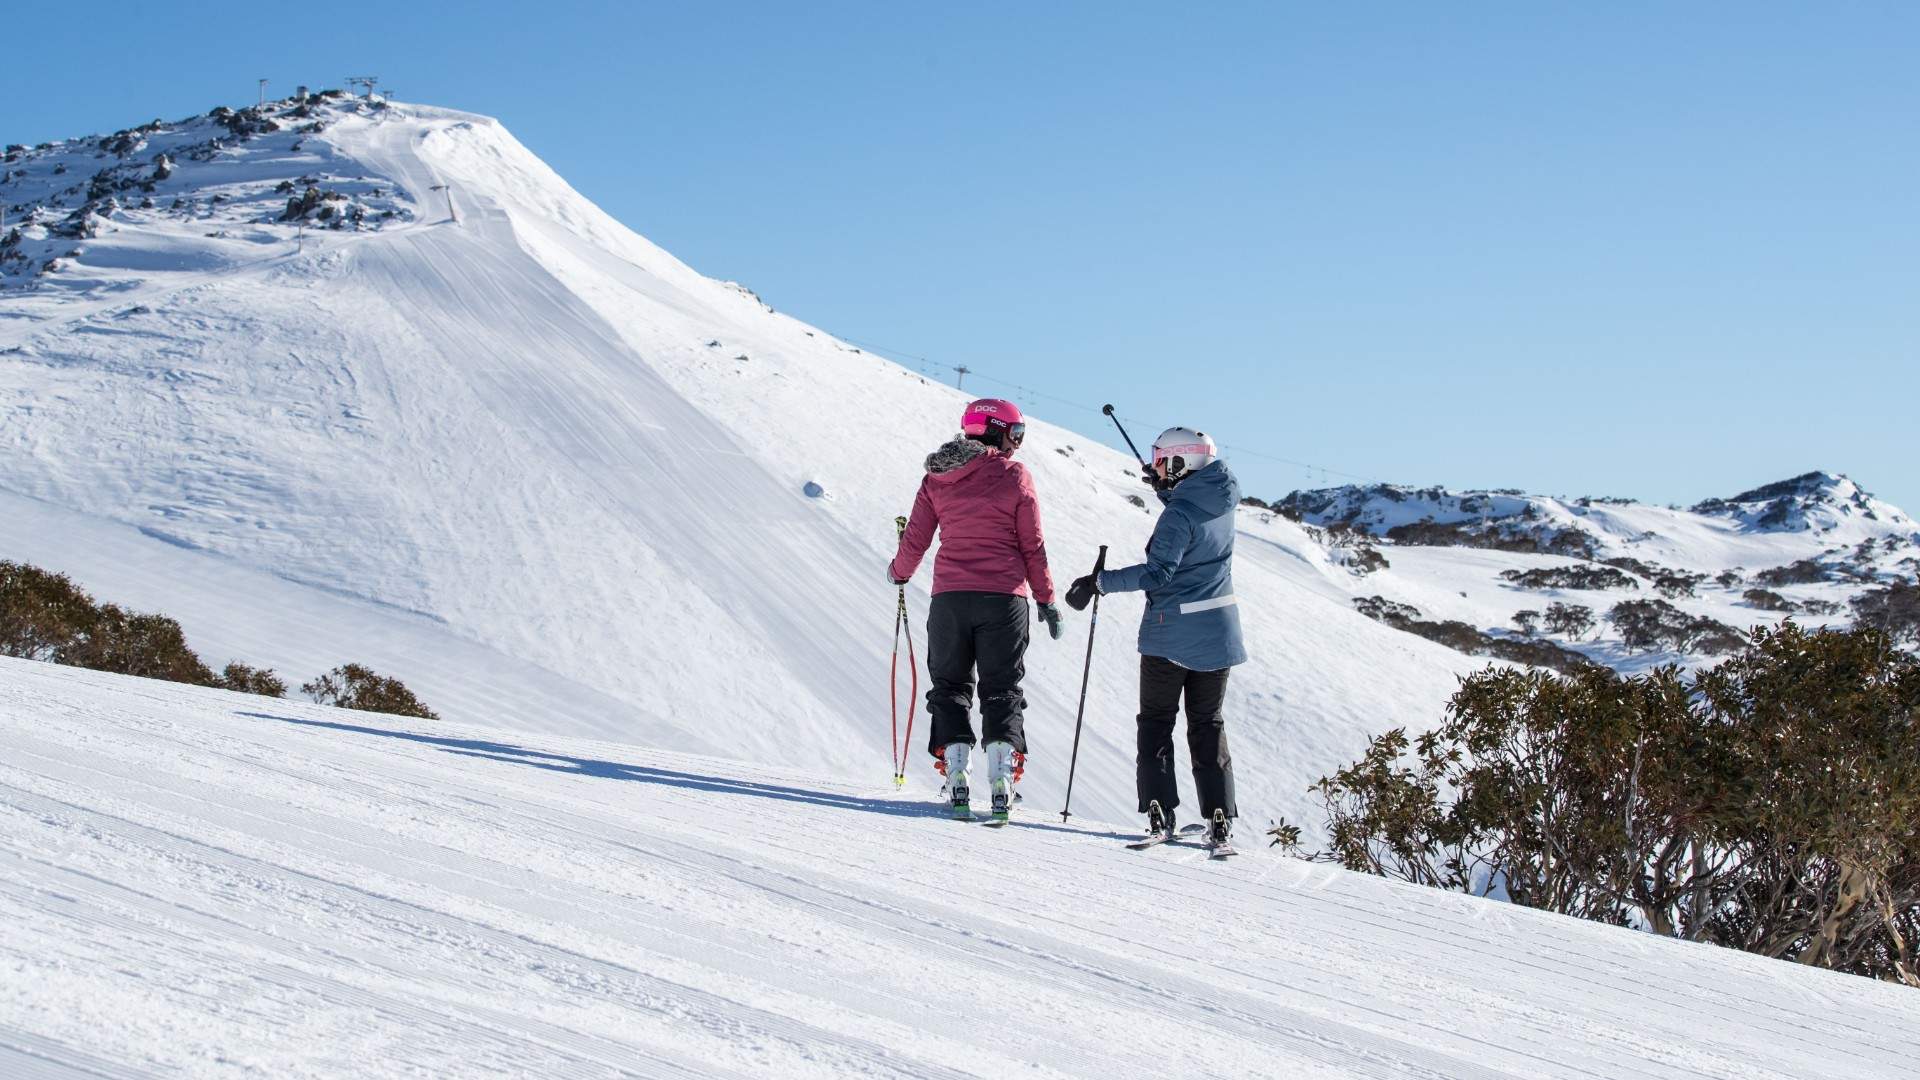 All of NSW's and Victoria's Major Snow Resorts Are Scheduled to Open By the End of June